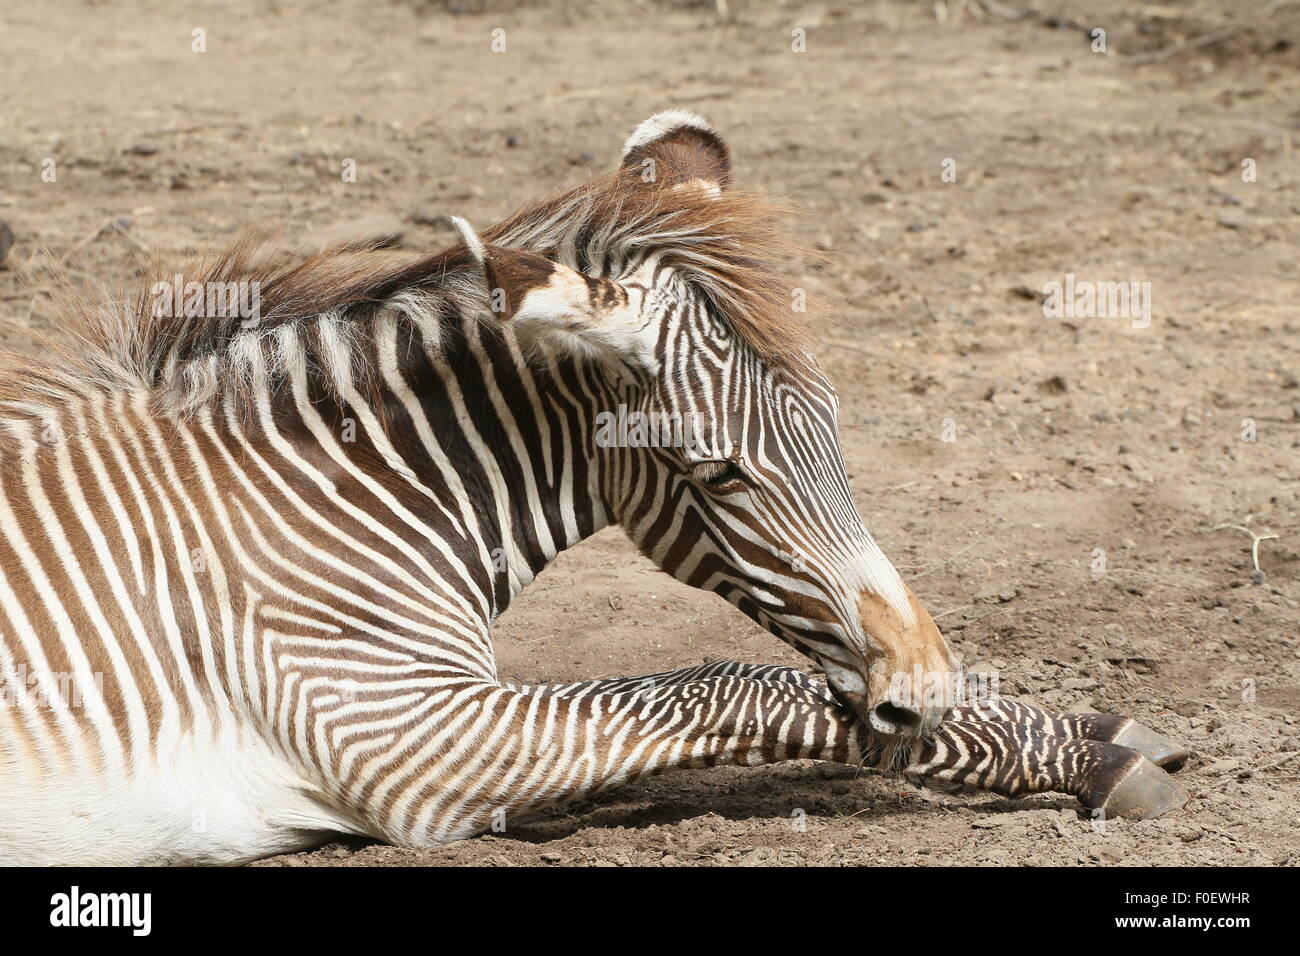 East African Grévy's zebra or Imperial zebra (Equus grevyi) foal, resting on the ground Stock Photo